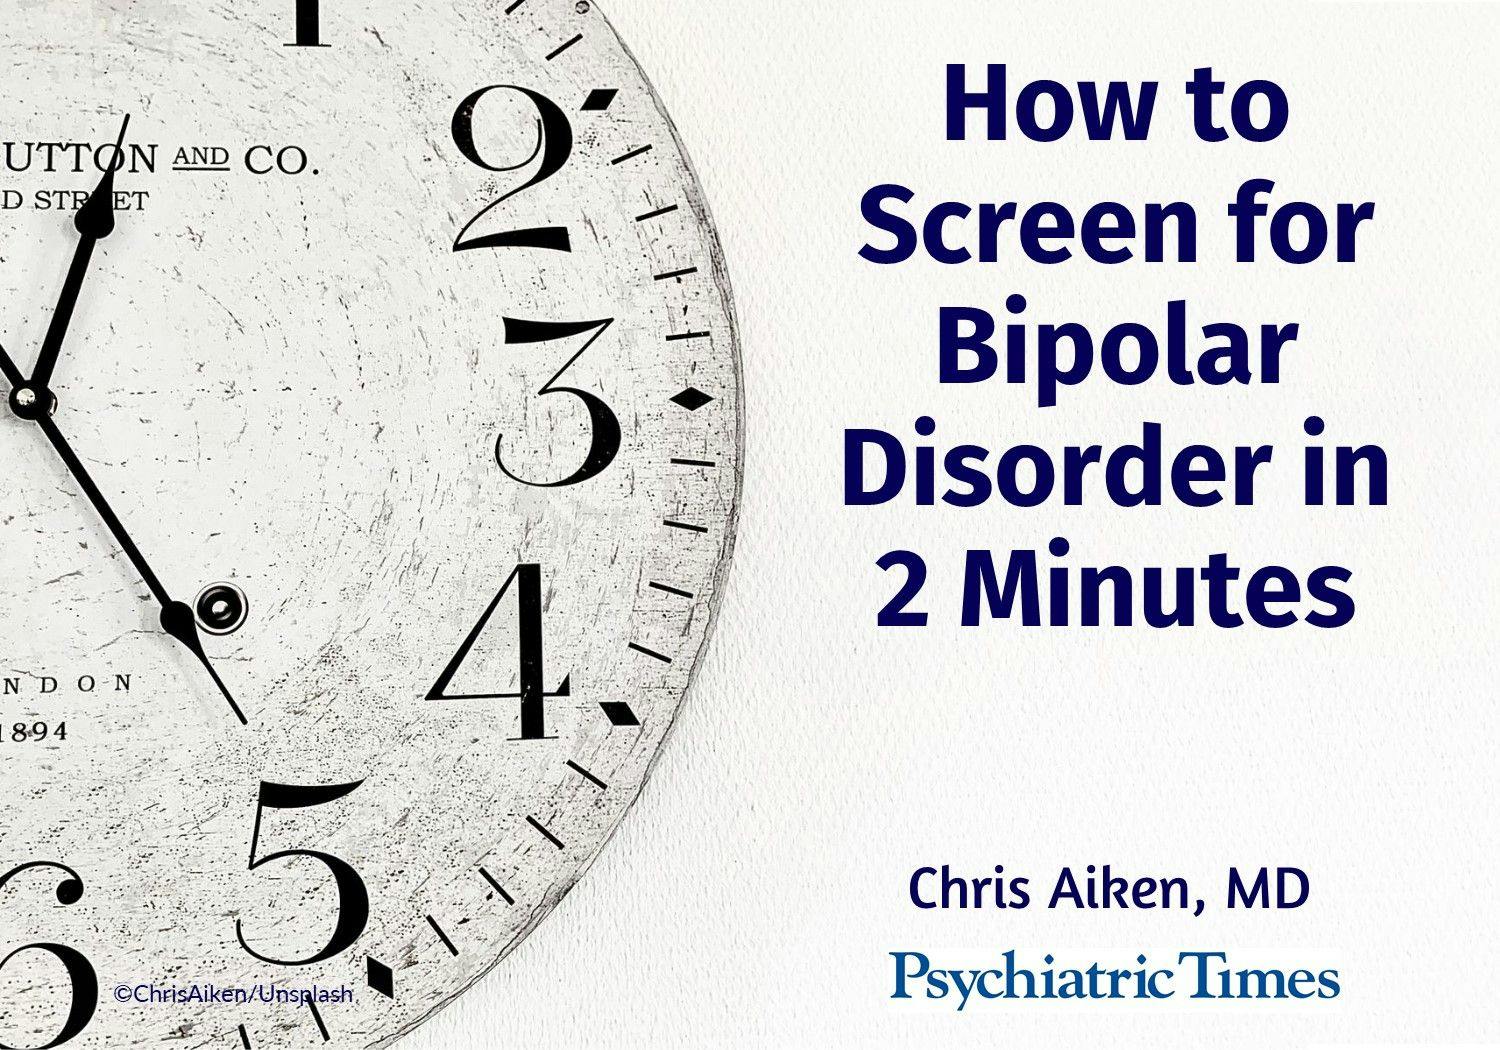 How to Screen for Bipolar Disorder in 2 Minutes